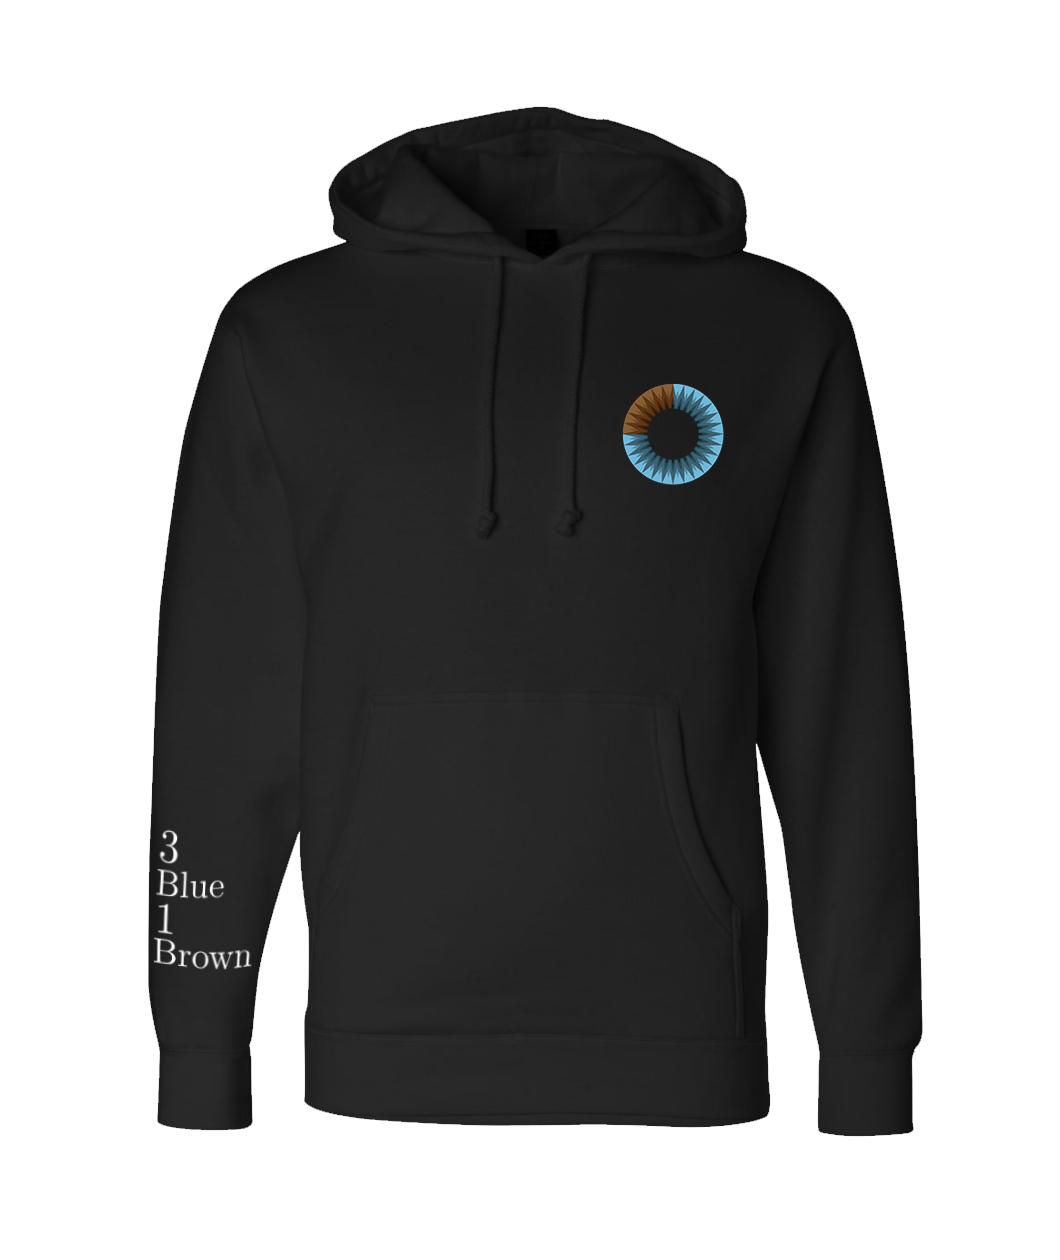 Black logo hoodie from 3Blue1Brown. Circular eye is in upper right and colored three quarters blue and one quarter brown. 3 Blue 1 Brown is written on the bottom of the left sleeve.